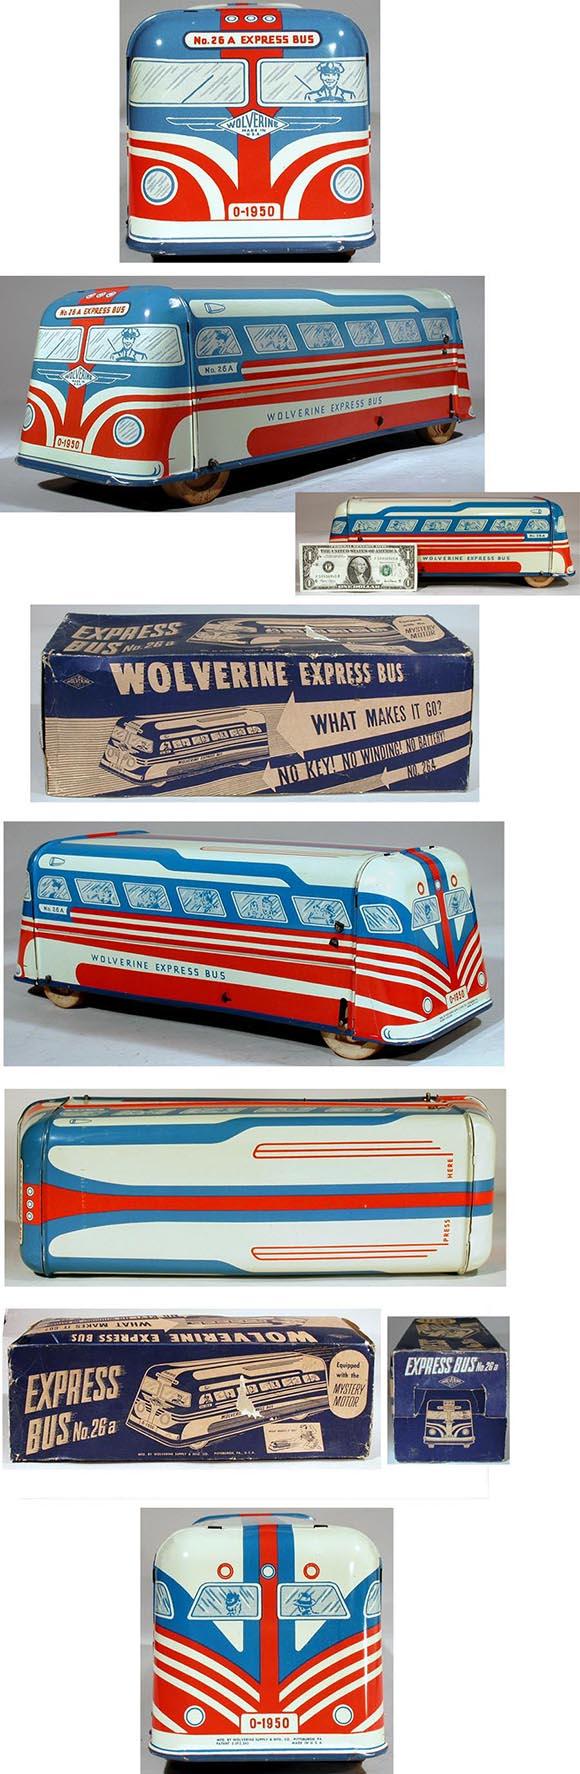 1950 Wolverine, No.26a Mystery Motor Express Bus in Original Box